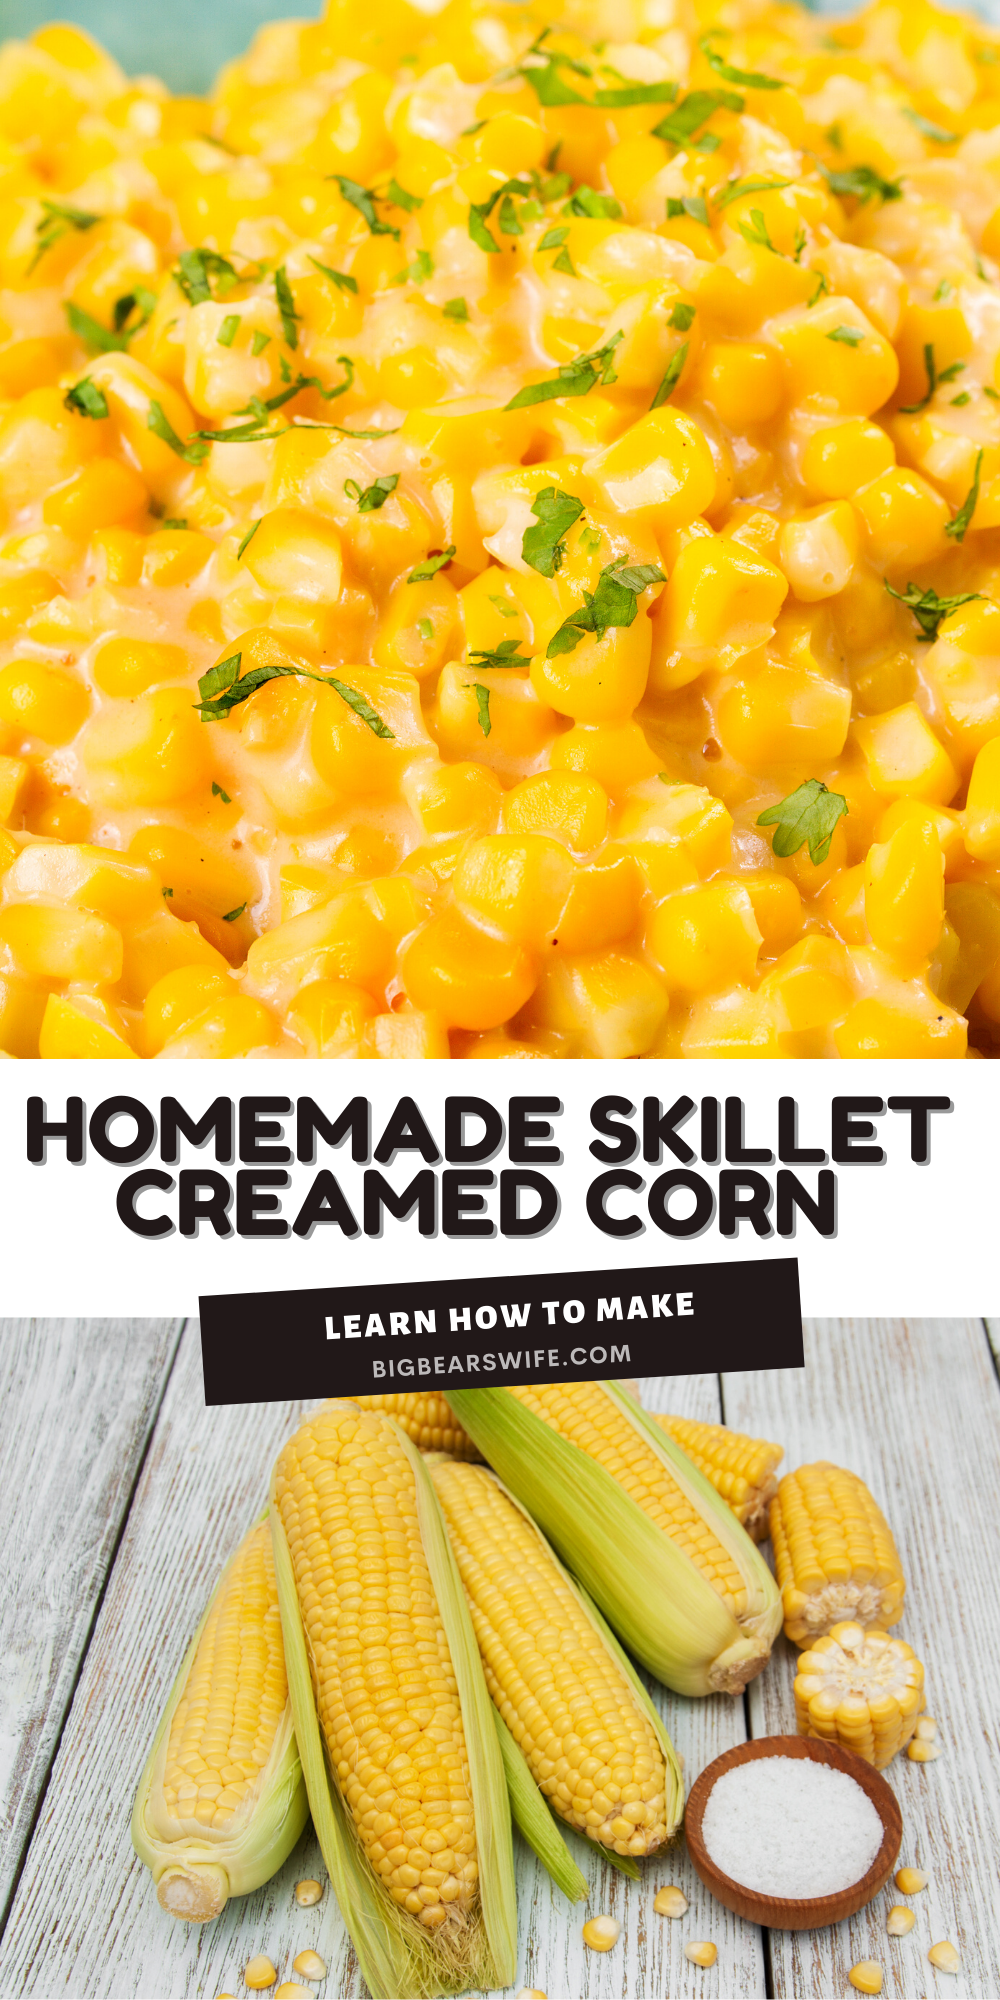 This recipe for Homemade Skillet Creamed Corn is so delicious and it's pretty easy to put together. Homemade Skillet Creamed Corn is great for a side dish for Thanksgiving, Corn Chowder or my favorite Creamed Corn Mac and Cheese!  via @bigbearswife